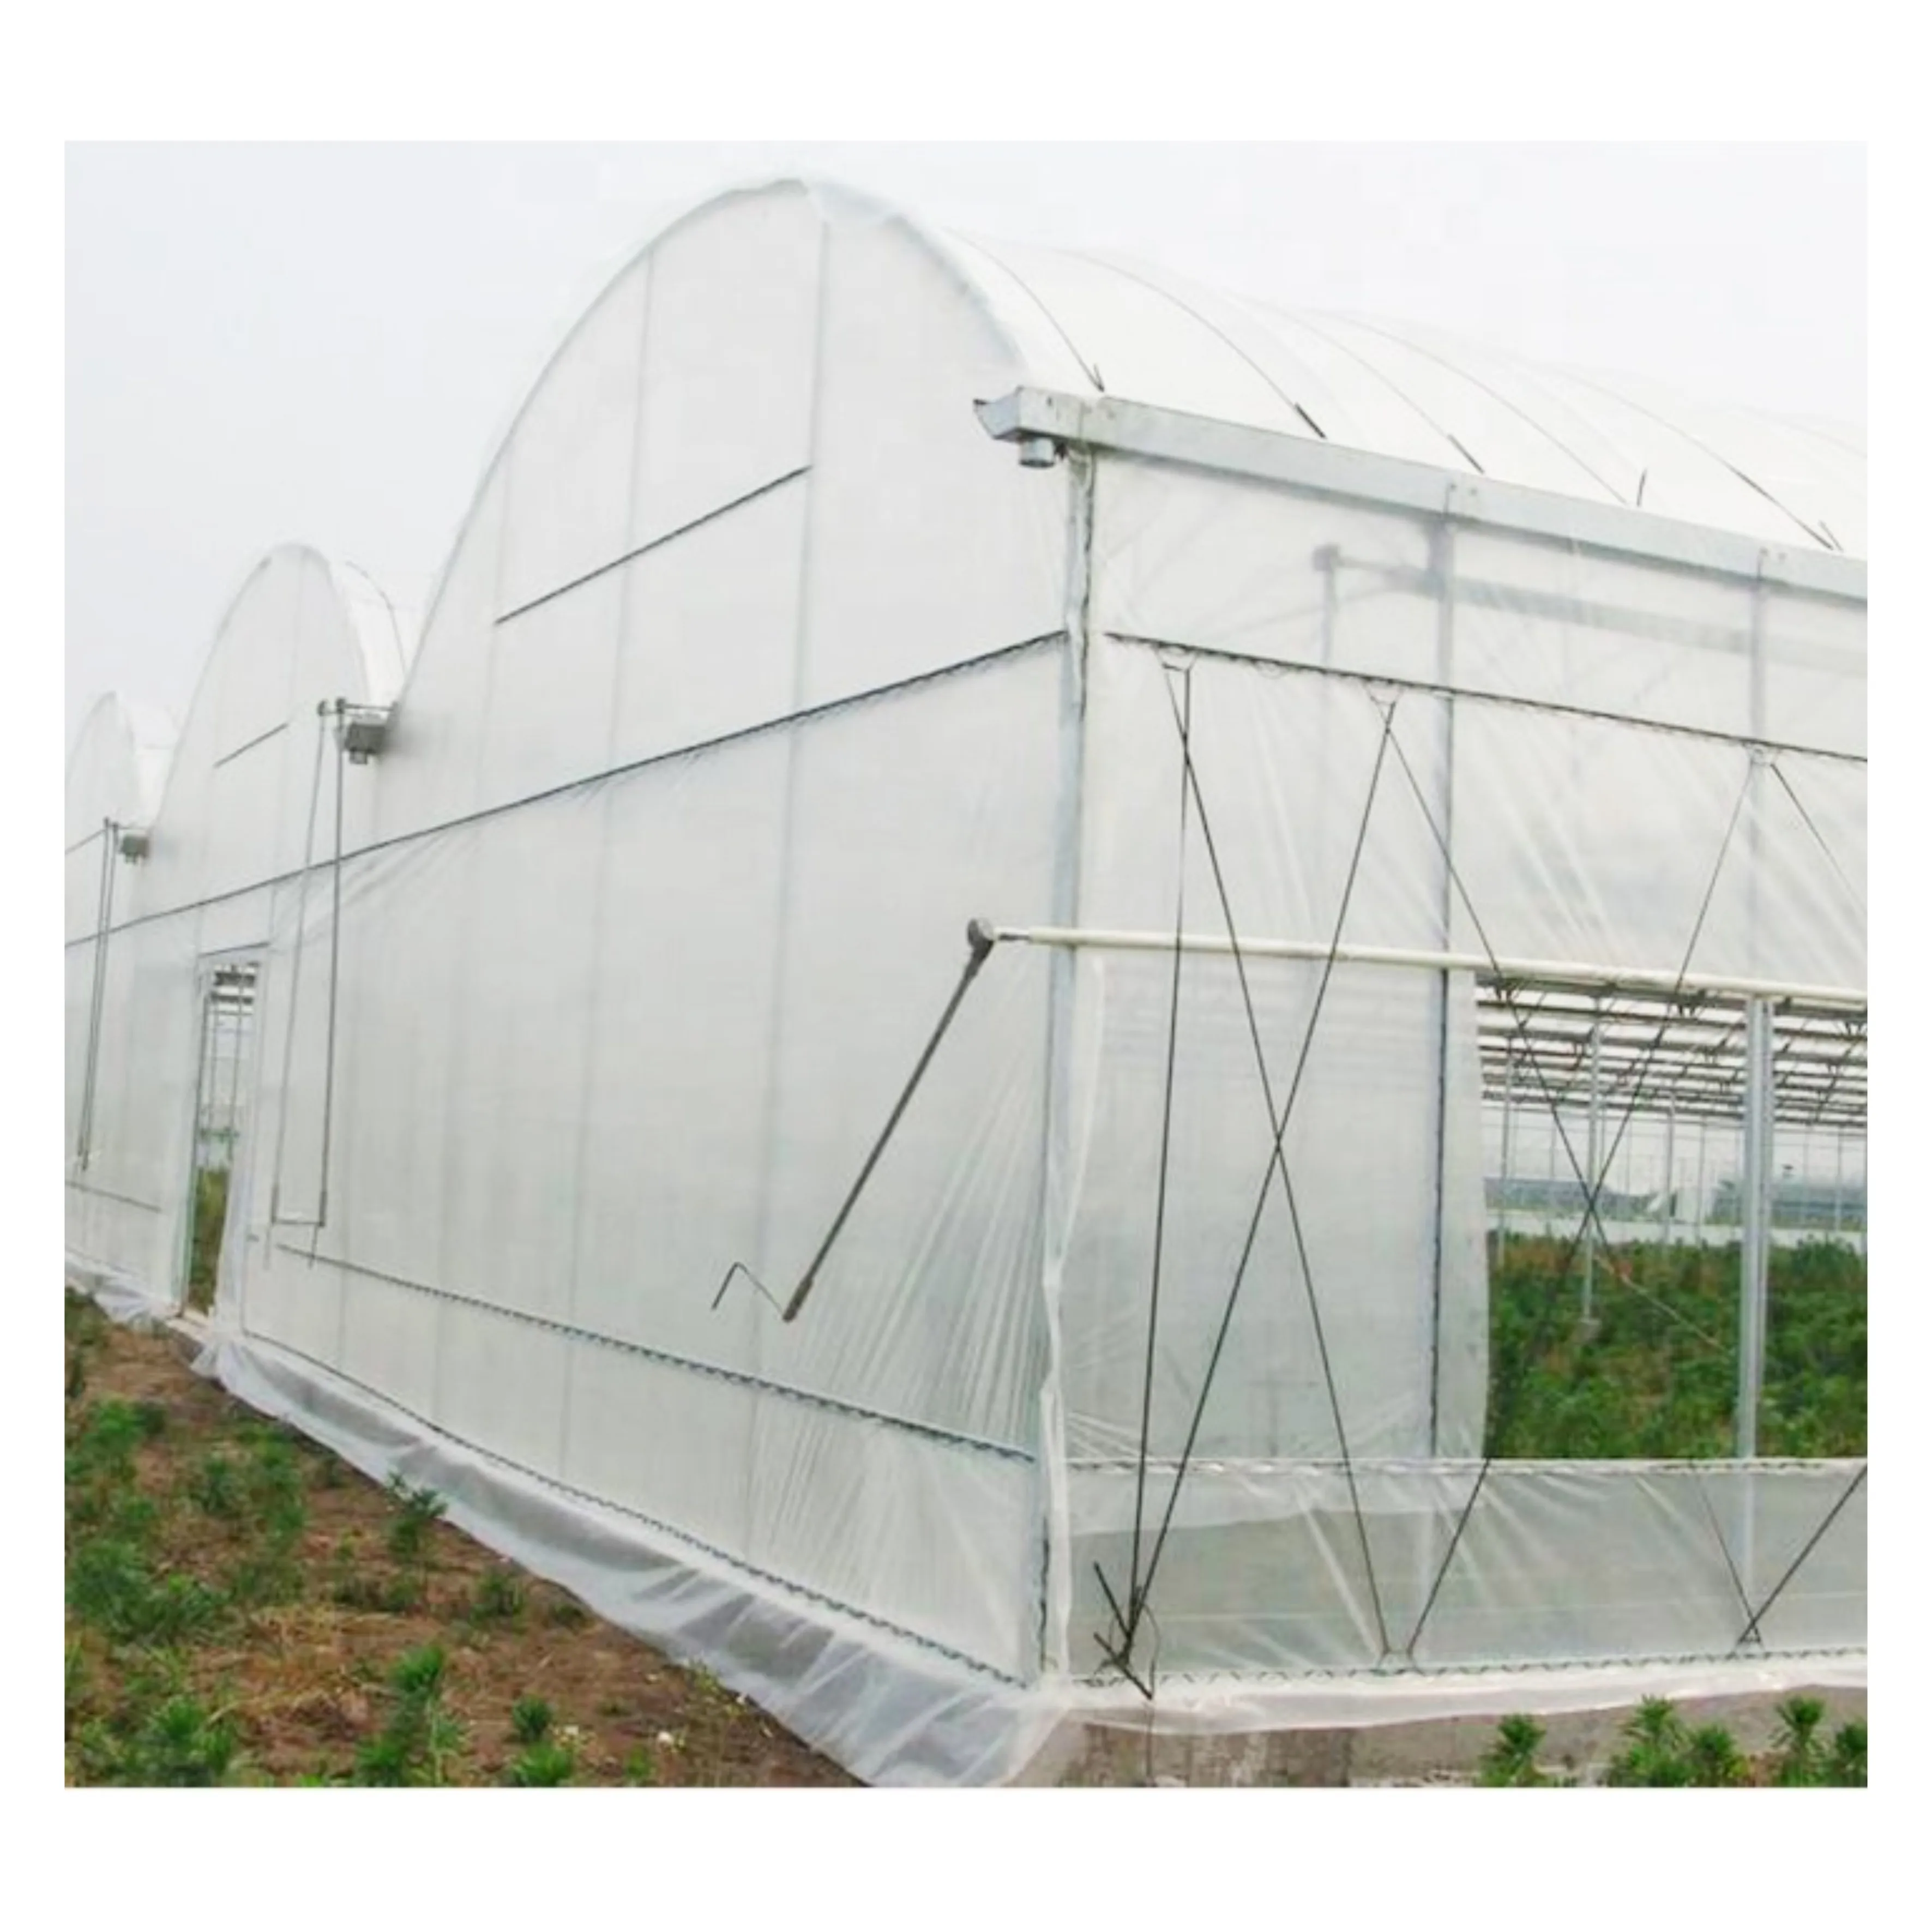 Large scale hydroponic greenhouse with customized agricultural film produced by Chinese Enterprises